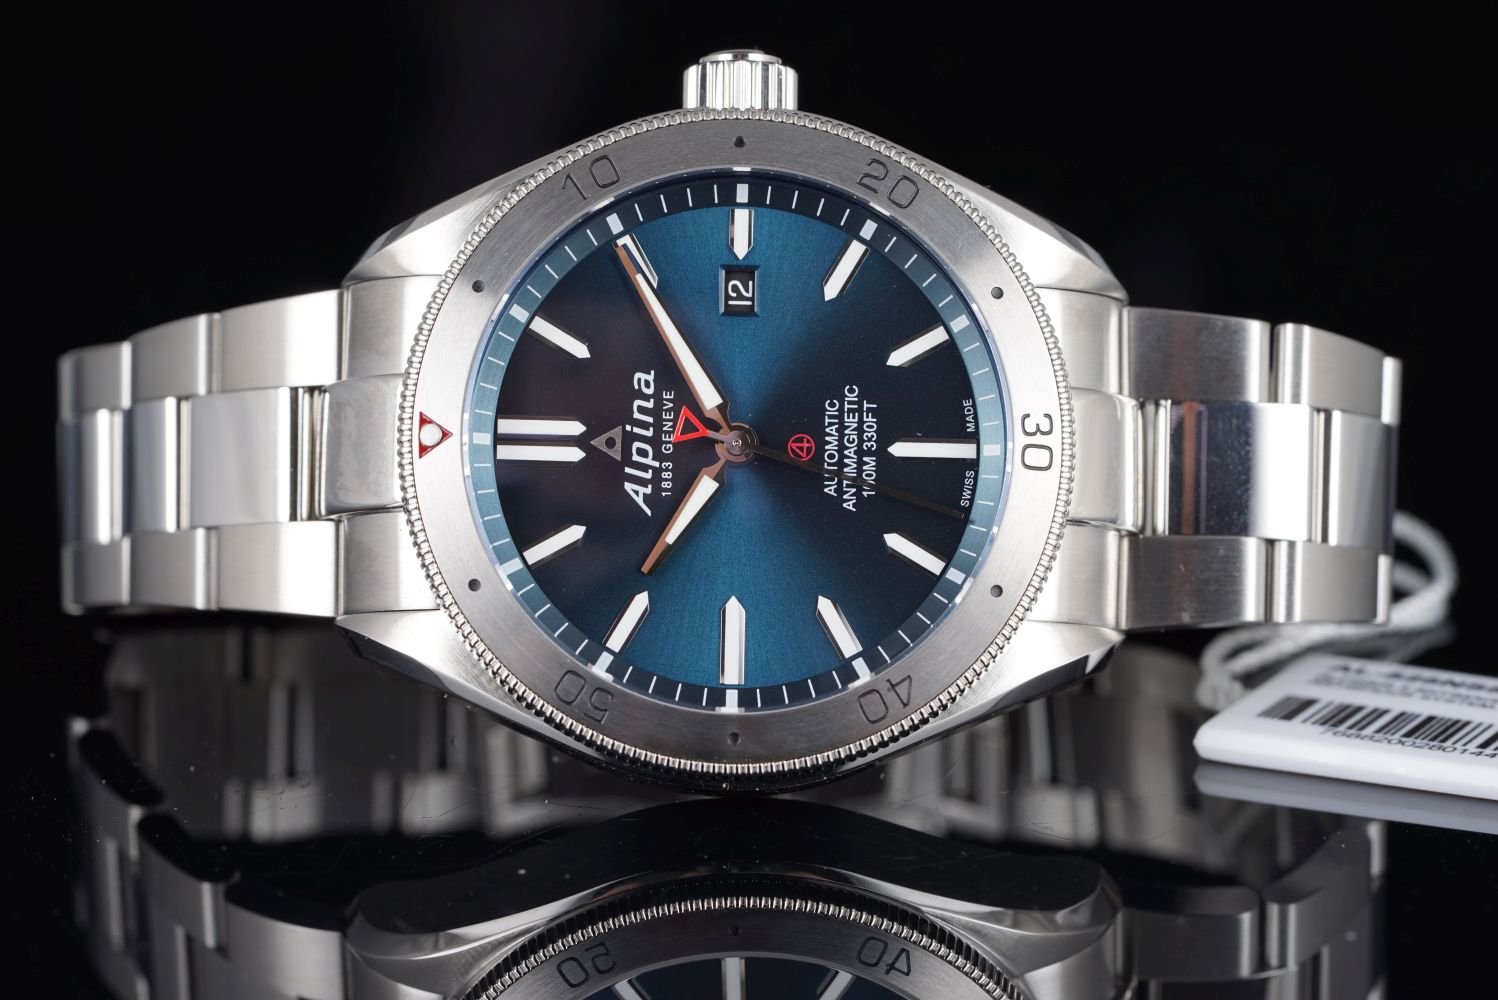 NOS ALPINA GENEVE AUTOMATIC ANTIMAGNETIC REFERENCE AL525X5AQ6, blue circular dial, stainless steel